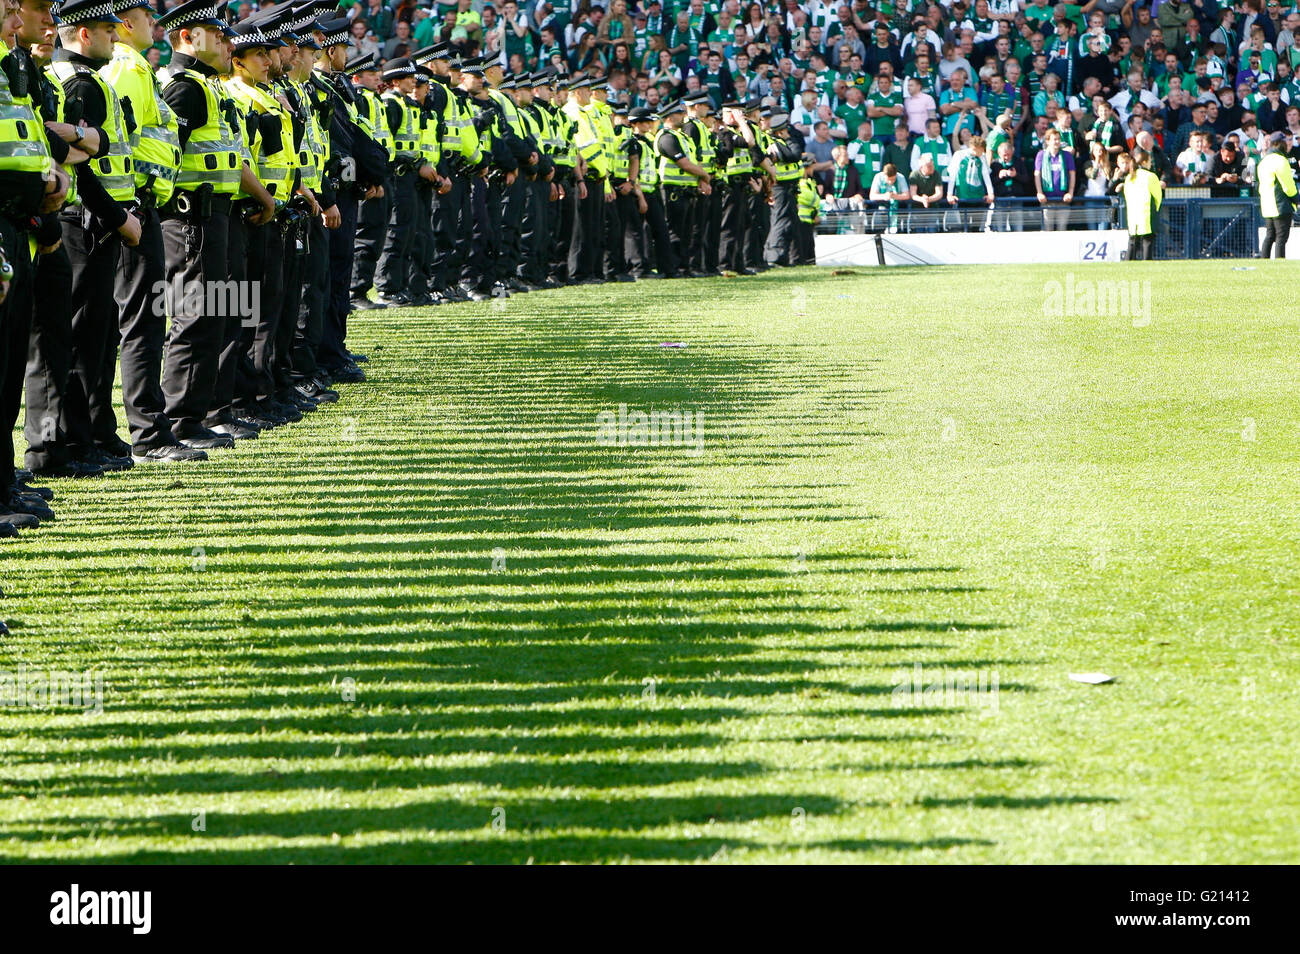 Hamden Park, Glasgow, Scotland. 21st May, 2016. Scottish Cup Final. Rangers  versus Hibernian. Hibernian's Martin Boyle (17) Celebrating their Scottish  Cup win against Rangers Cup after their 3-2 win Credit: Action Plus